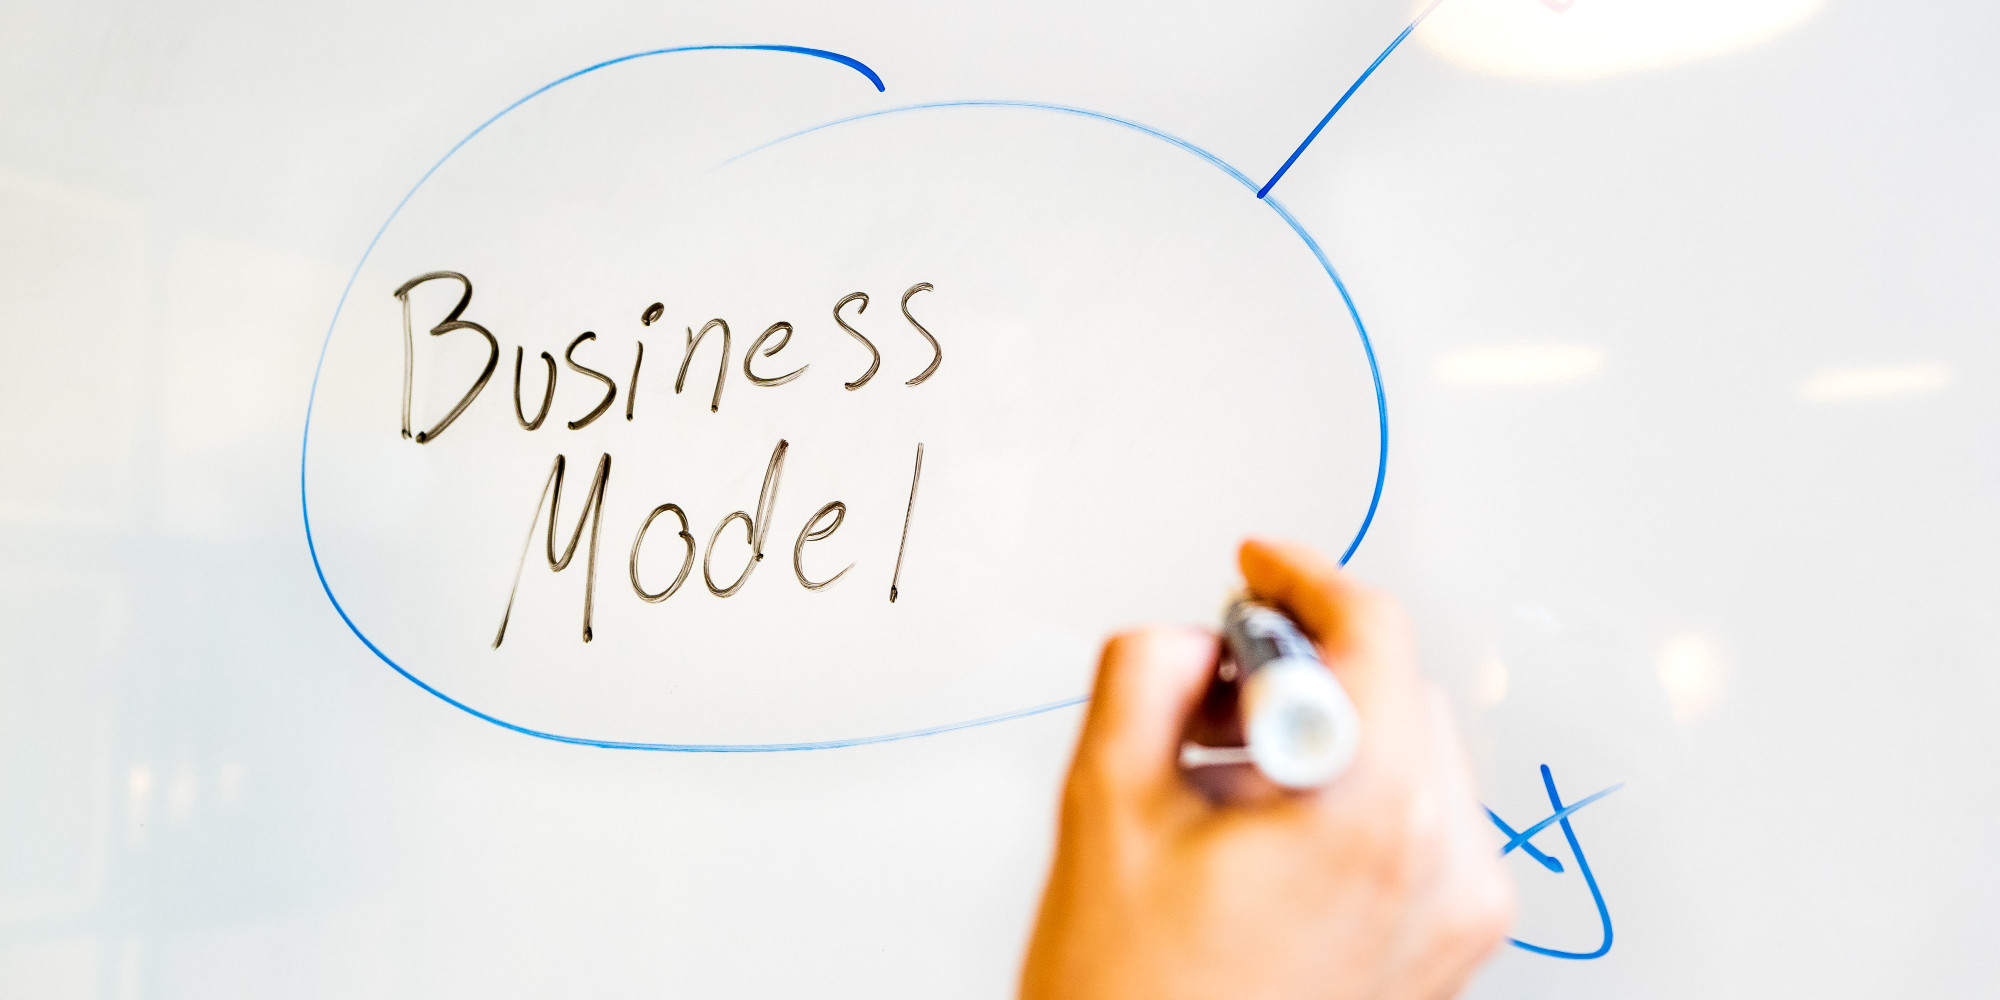 What is a business model, and why do we need them?